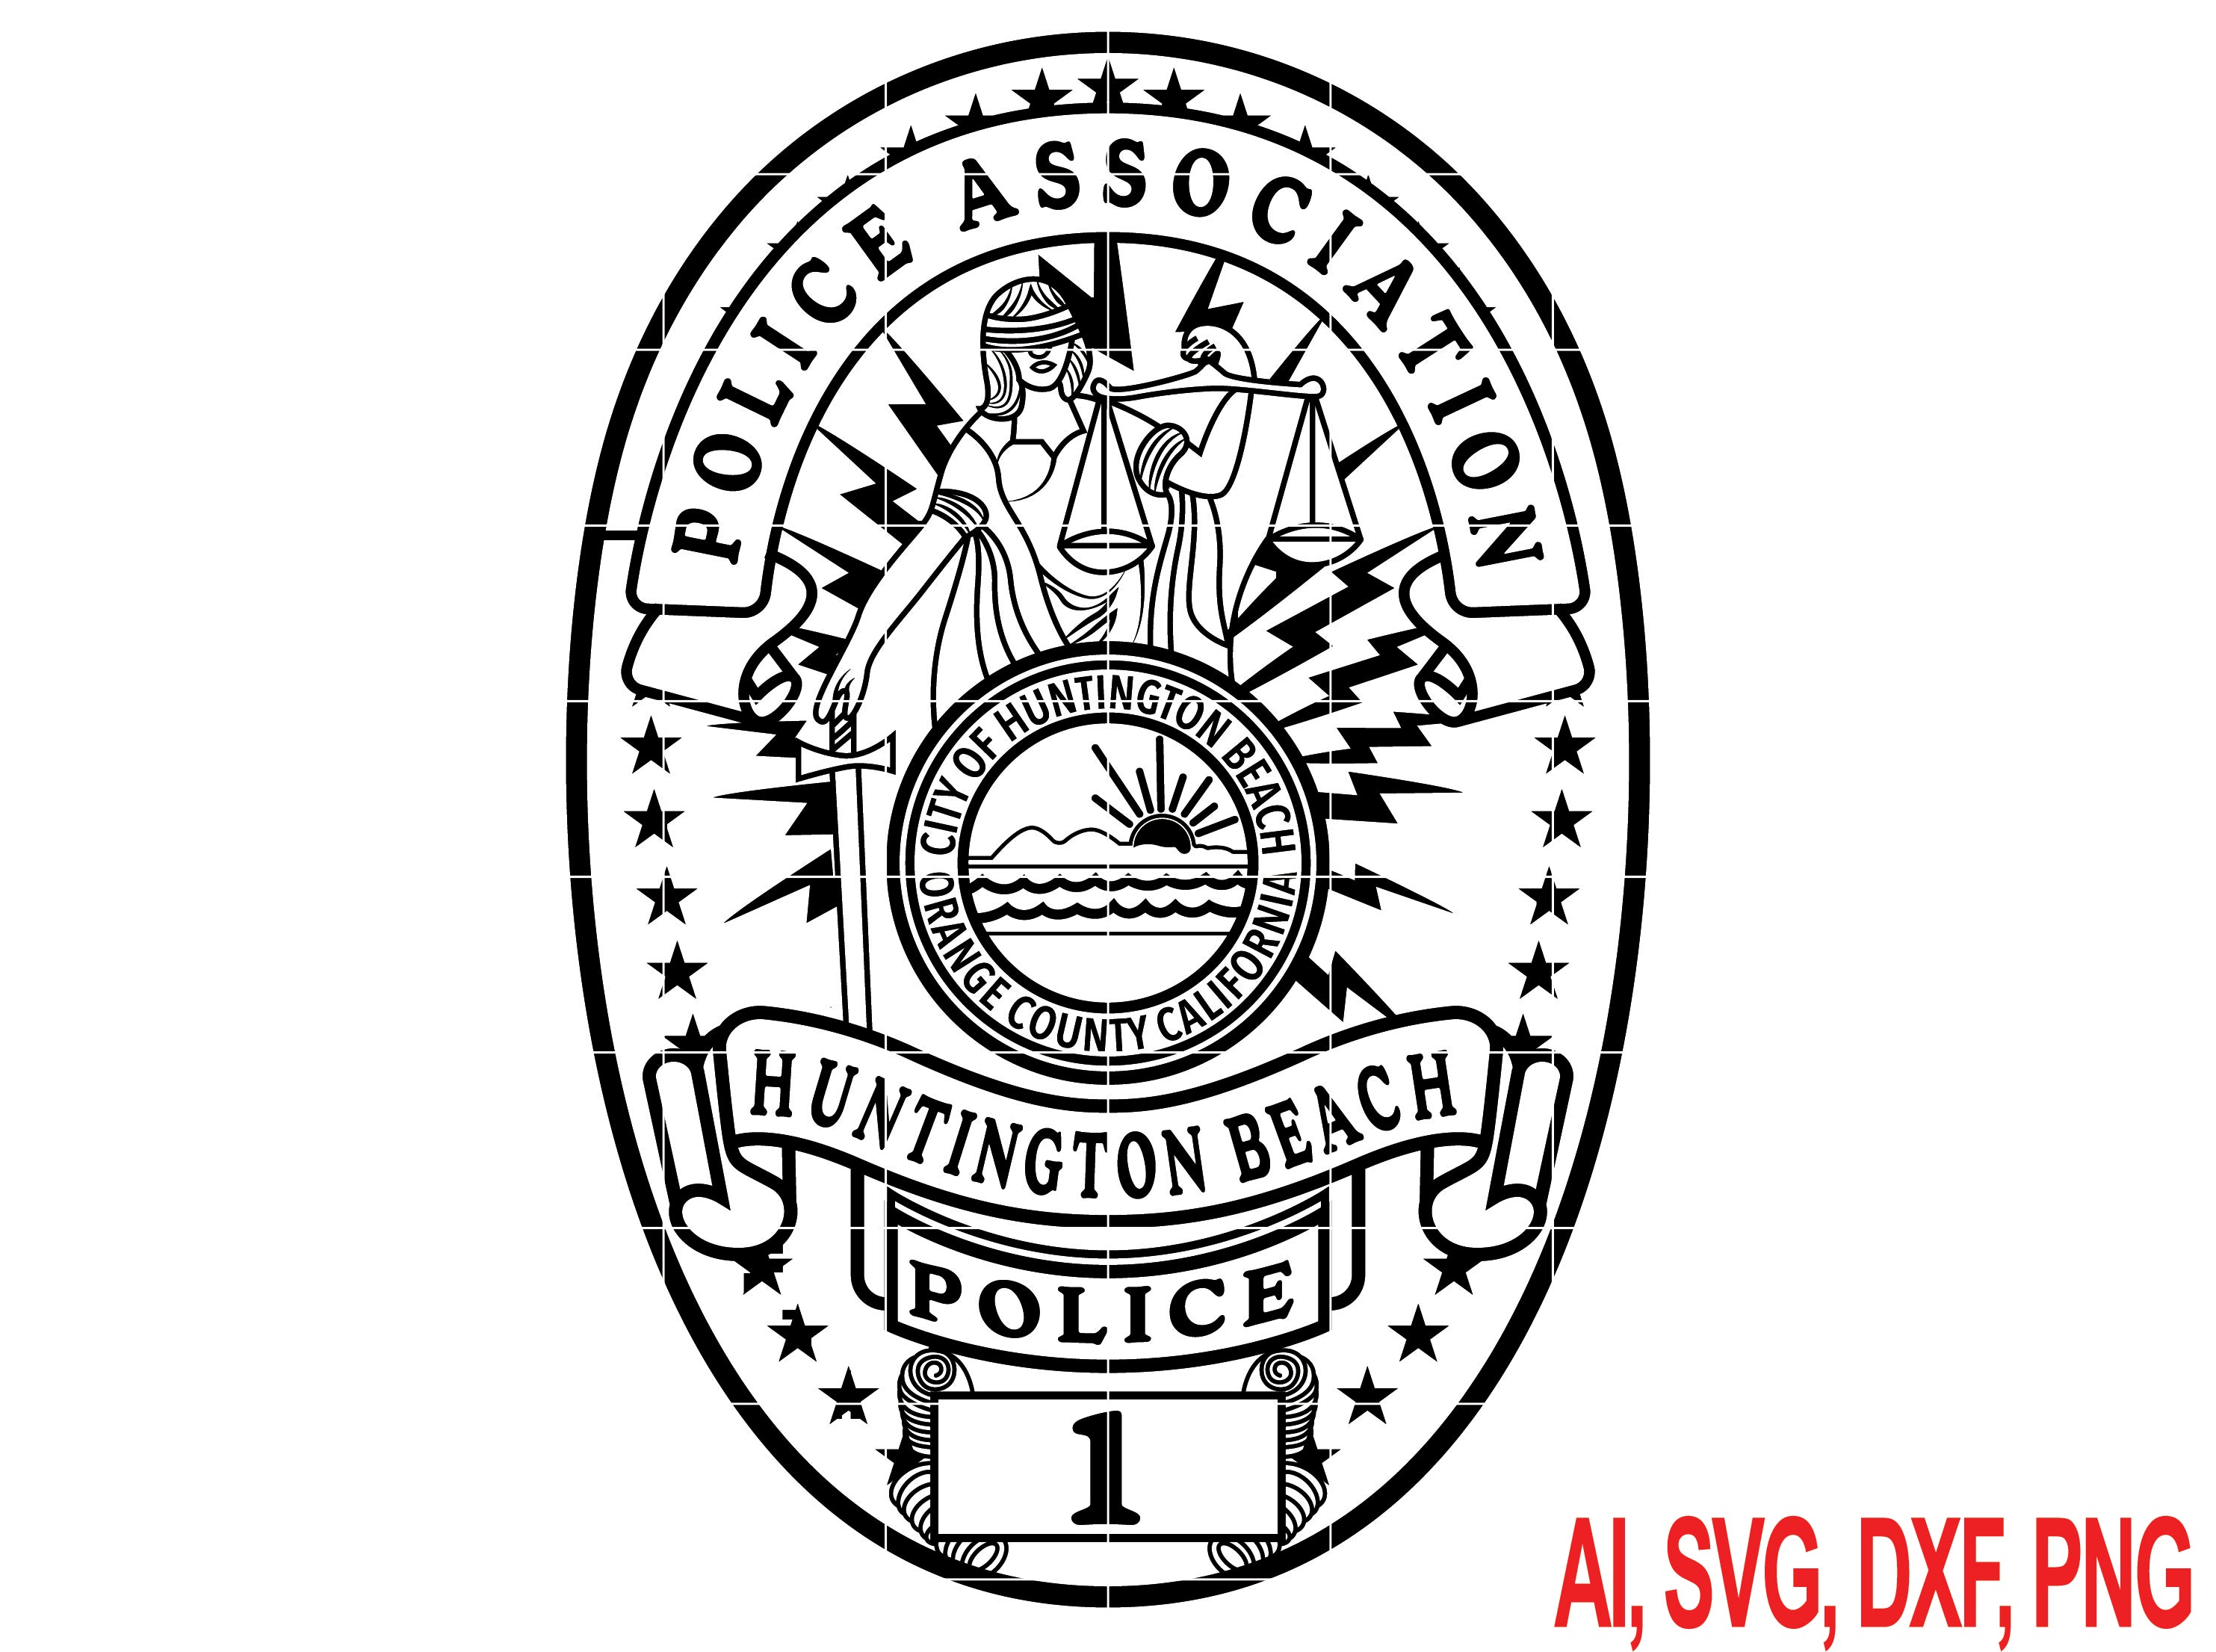 Huntington Beach Police Association Badge for Laser Engraving, Woodworking,Printing, CNC Router, Cricut, Ezecad etc.